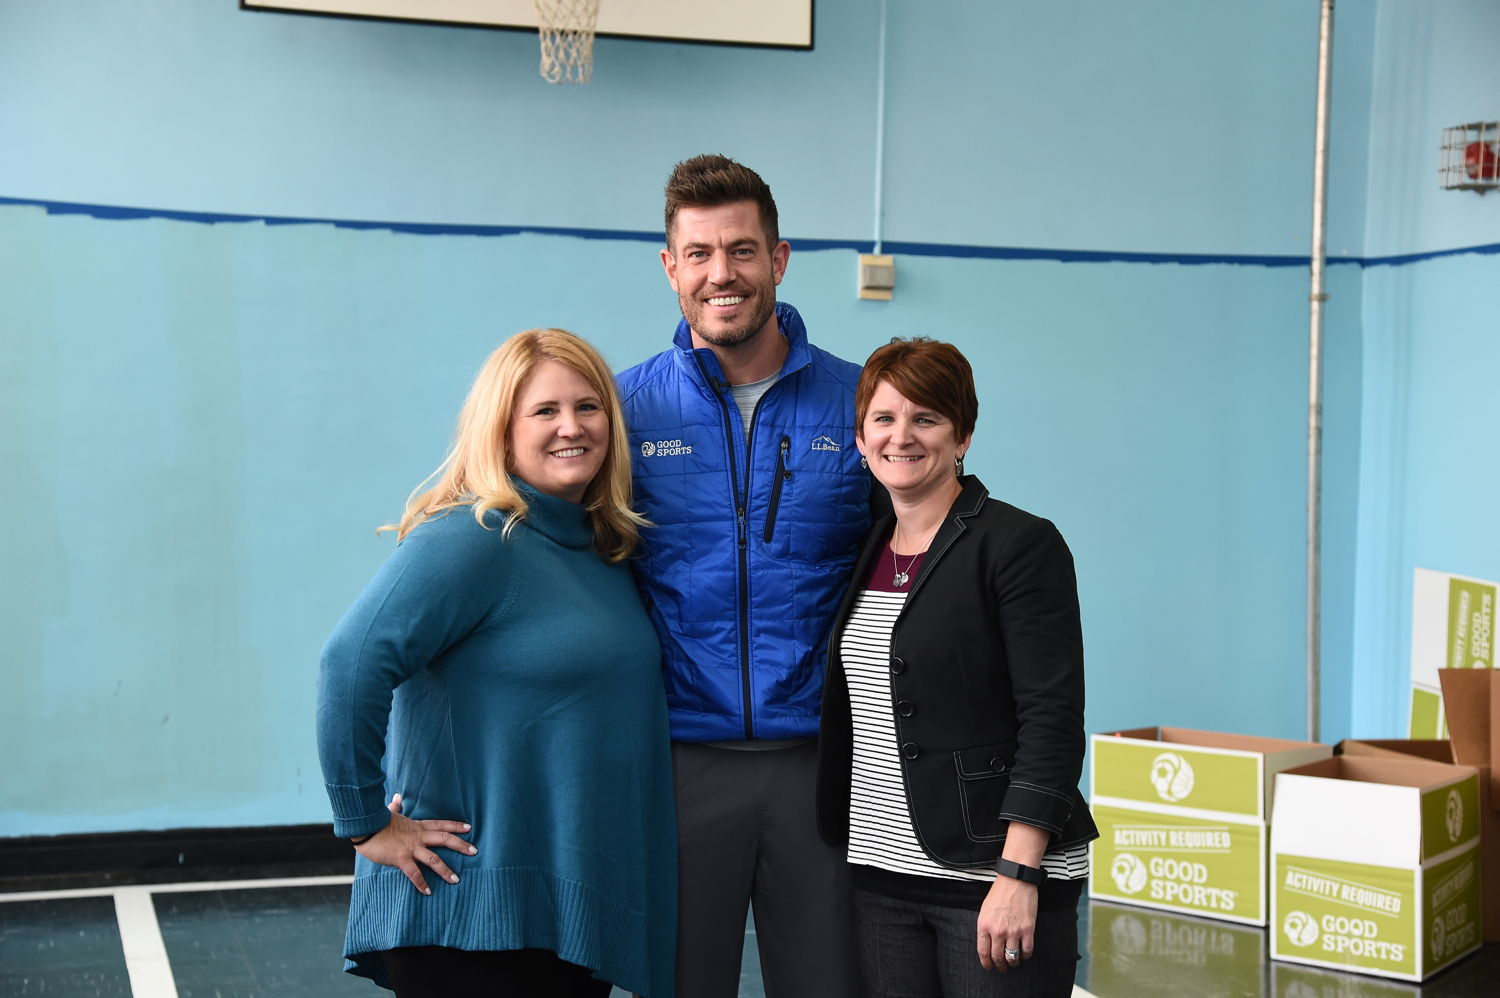 Jesse Palmer joins Good Sports co-founders Christy Keswick and Melissa Harper in NYC.